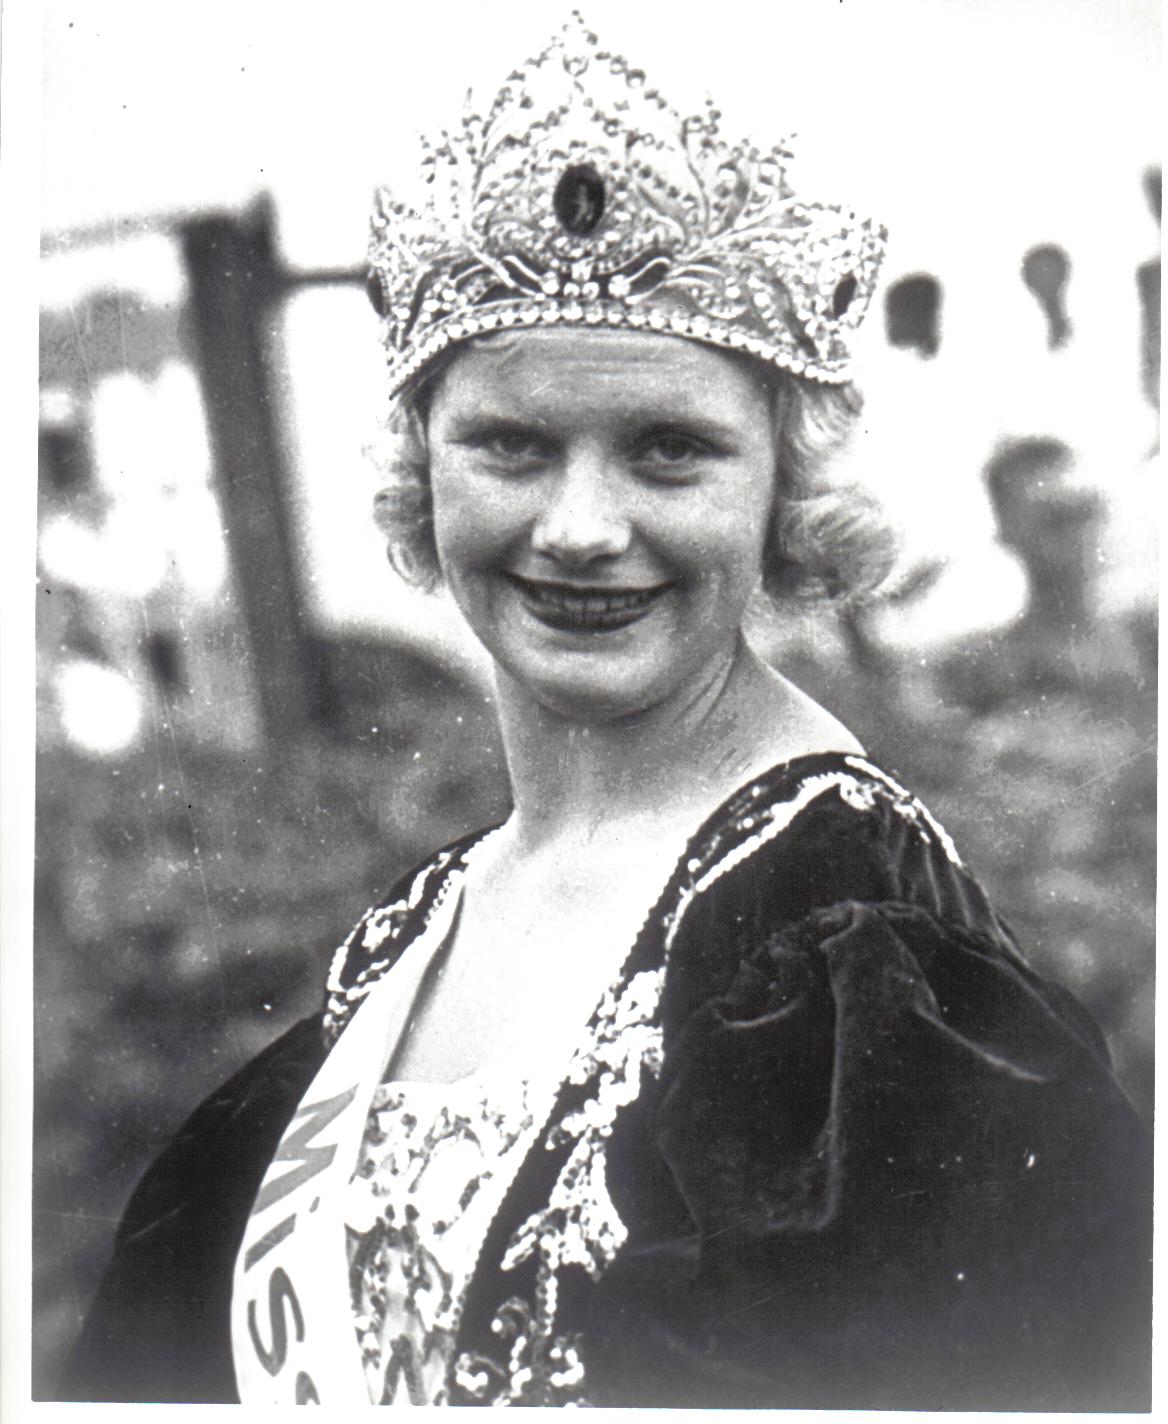 Marian Bergeron, the 1933 winner of the Miss America Contest.